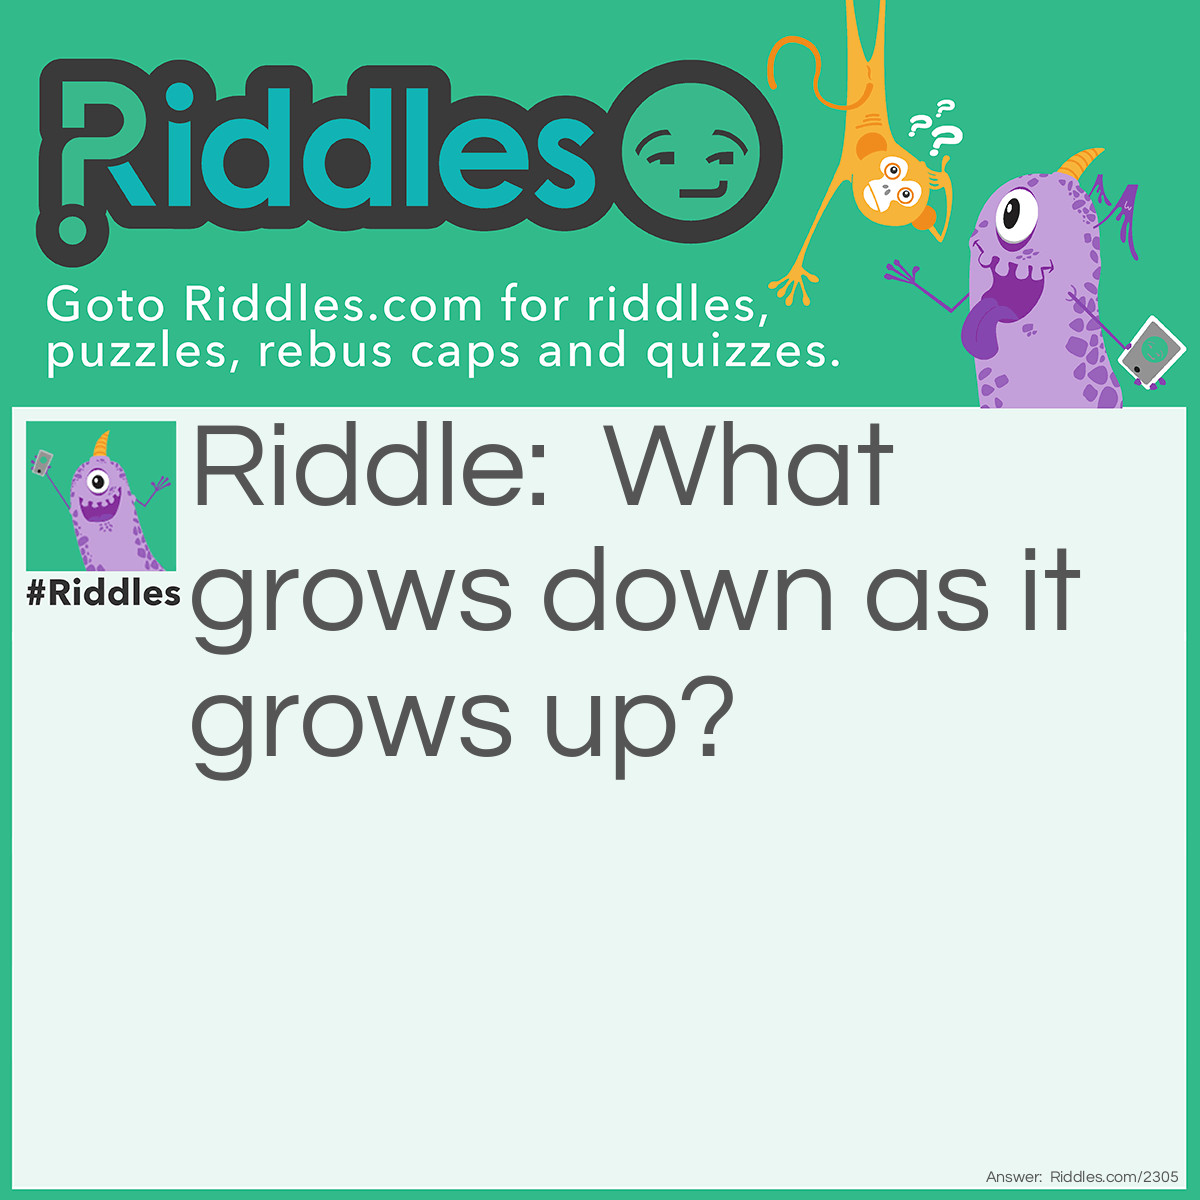 Riddle: What grows down as it grows up? Answer: A goose.